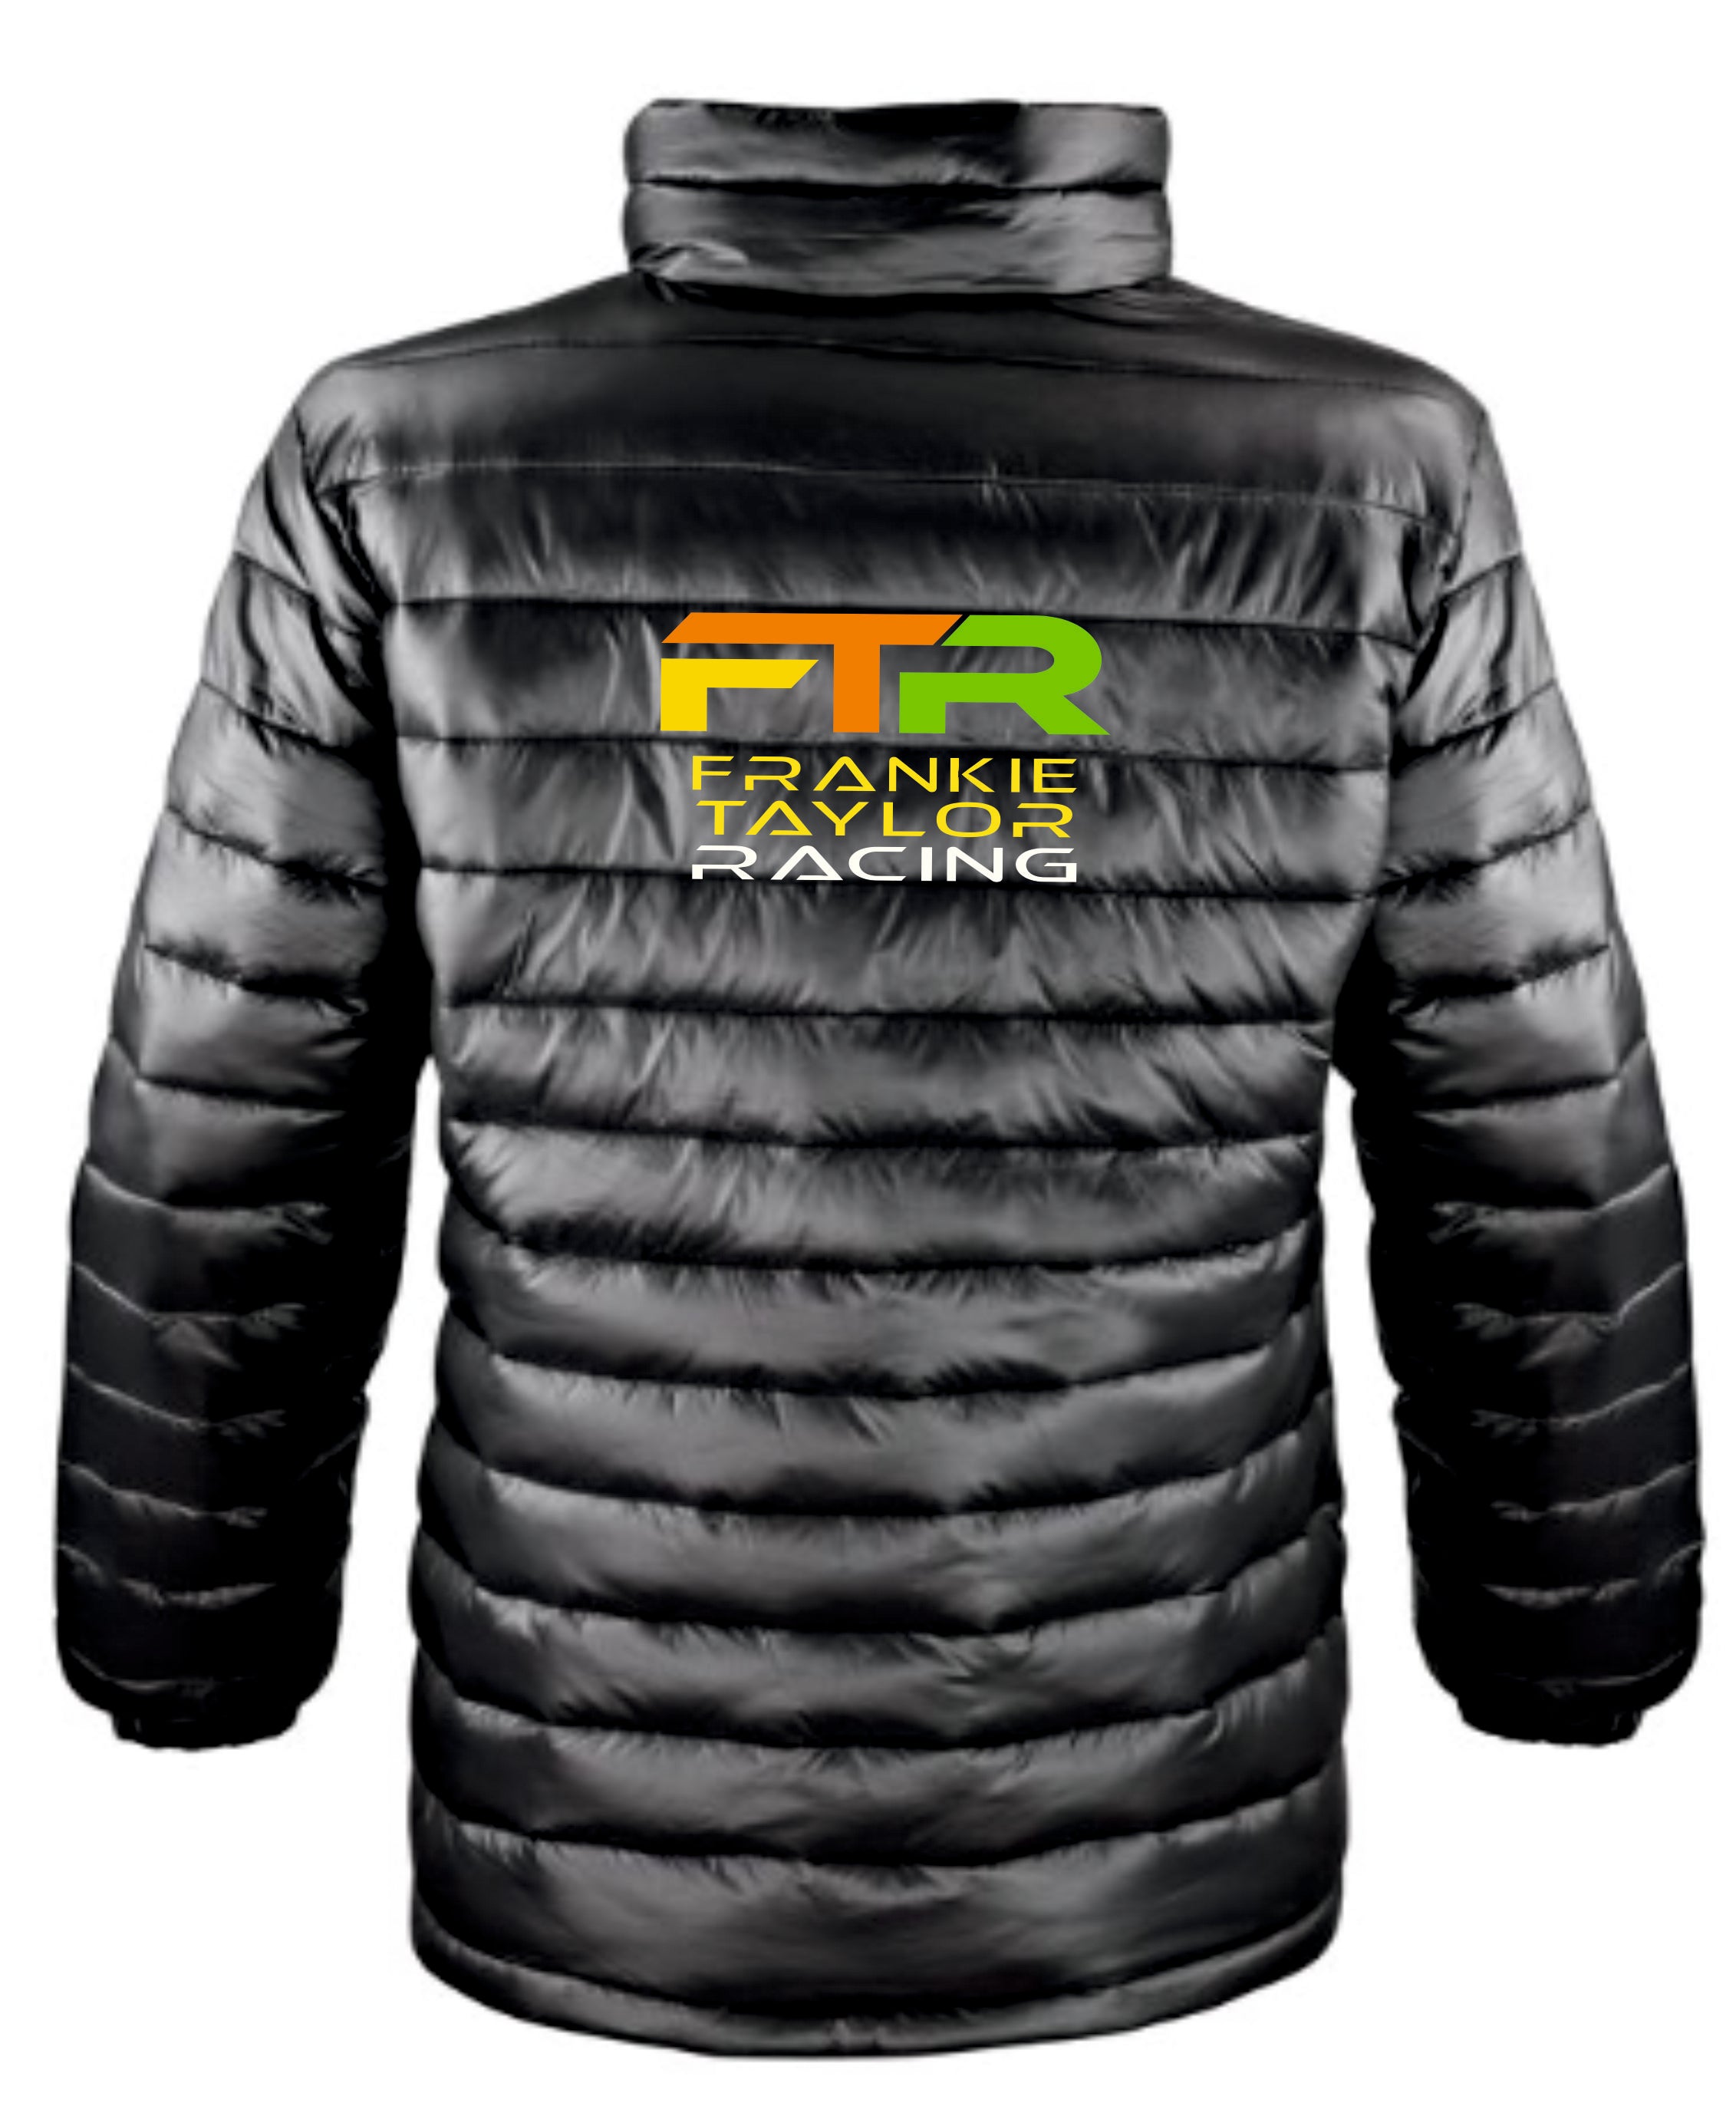 Frankie Taylor Racing Padded Jacket (non-hooded)